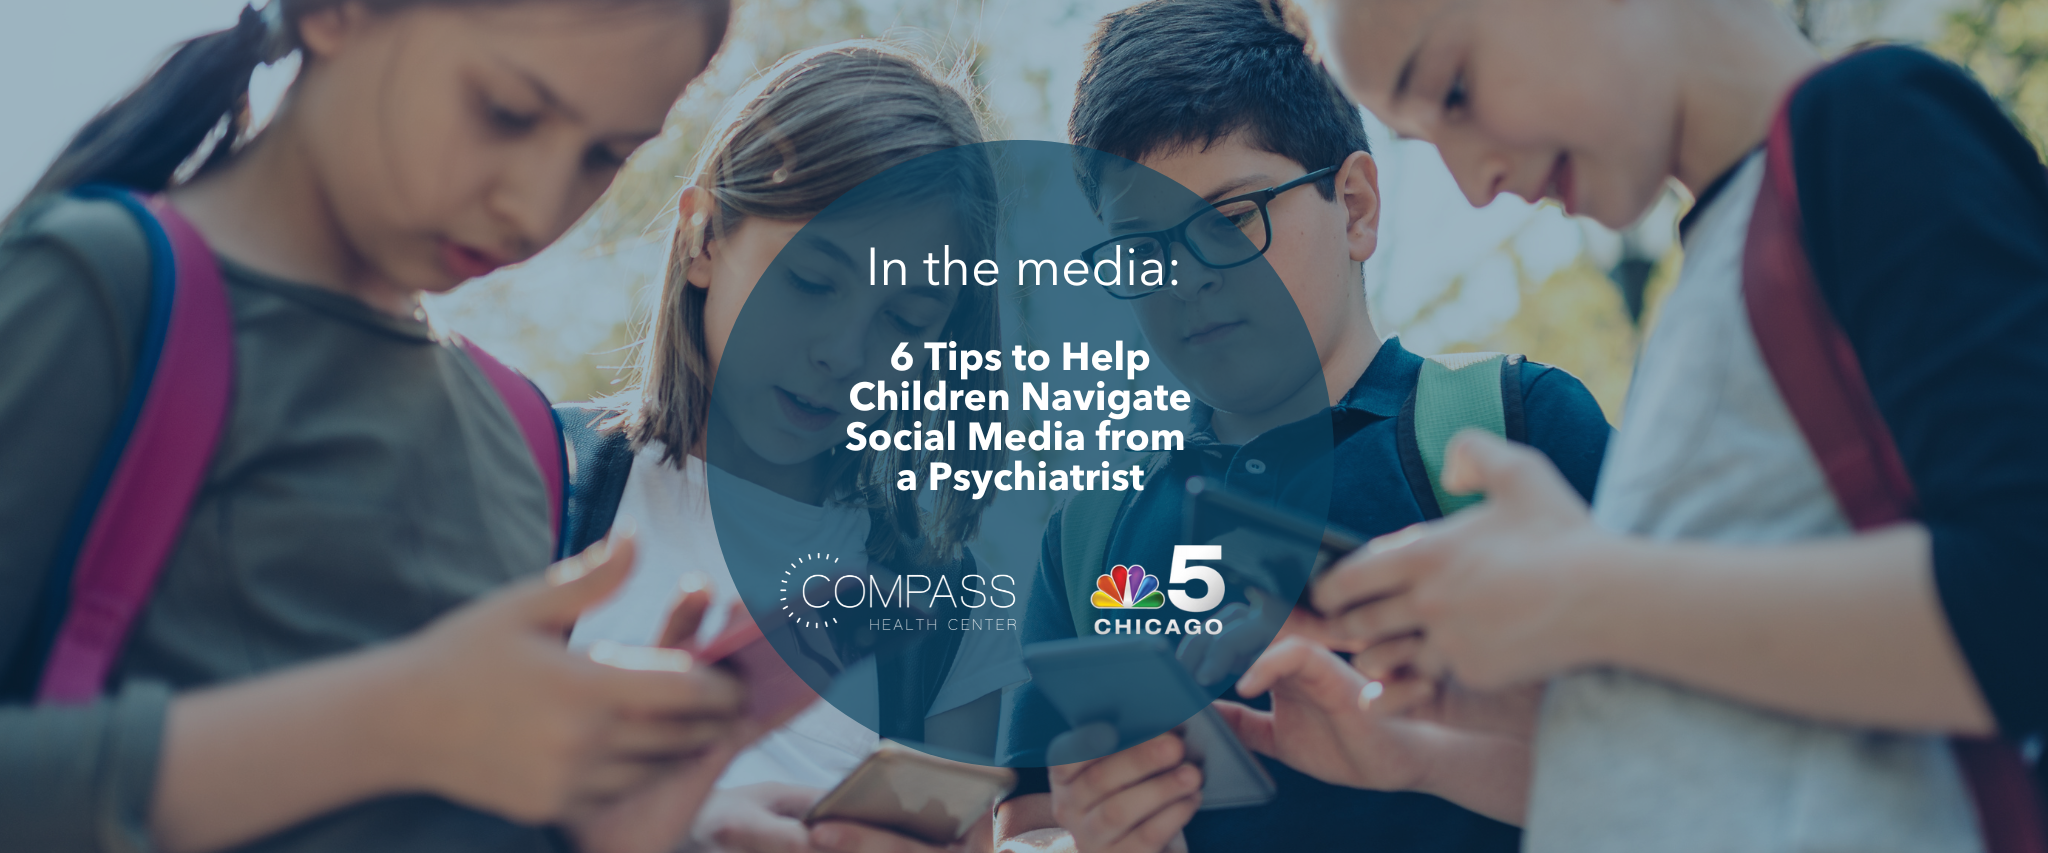 6 Tips to Help Children Navigate Social Media from a Psychiatrist: Insights from Compass Health Center's Dr. Claudia Welke on NBC Chicago